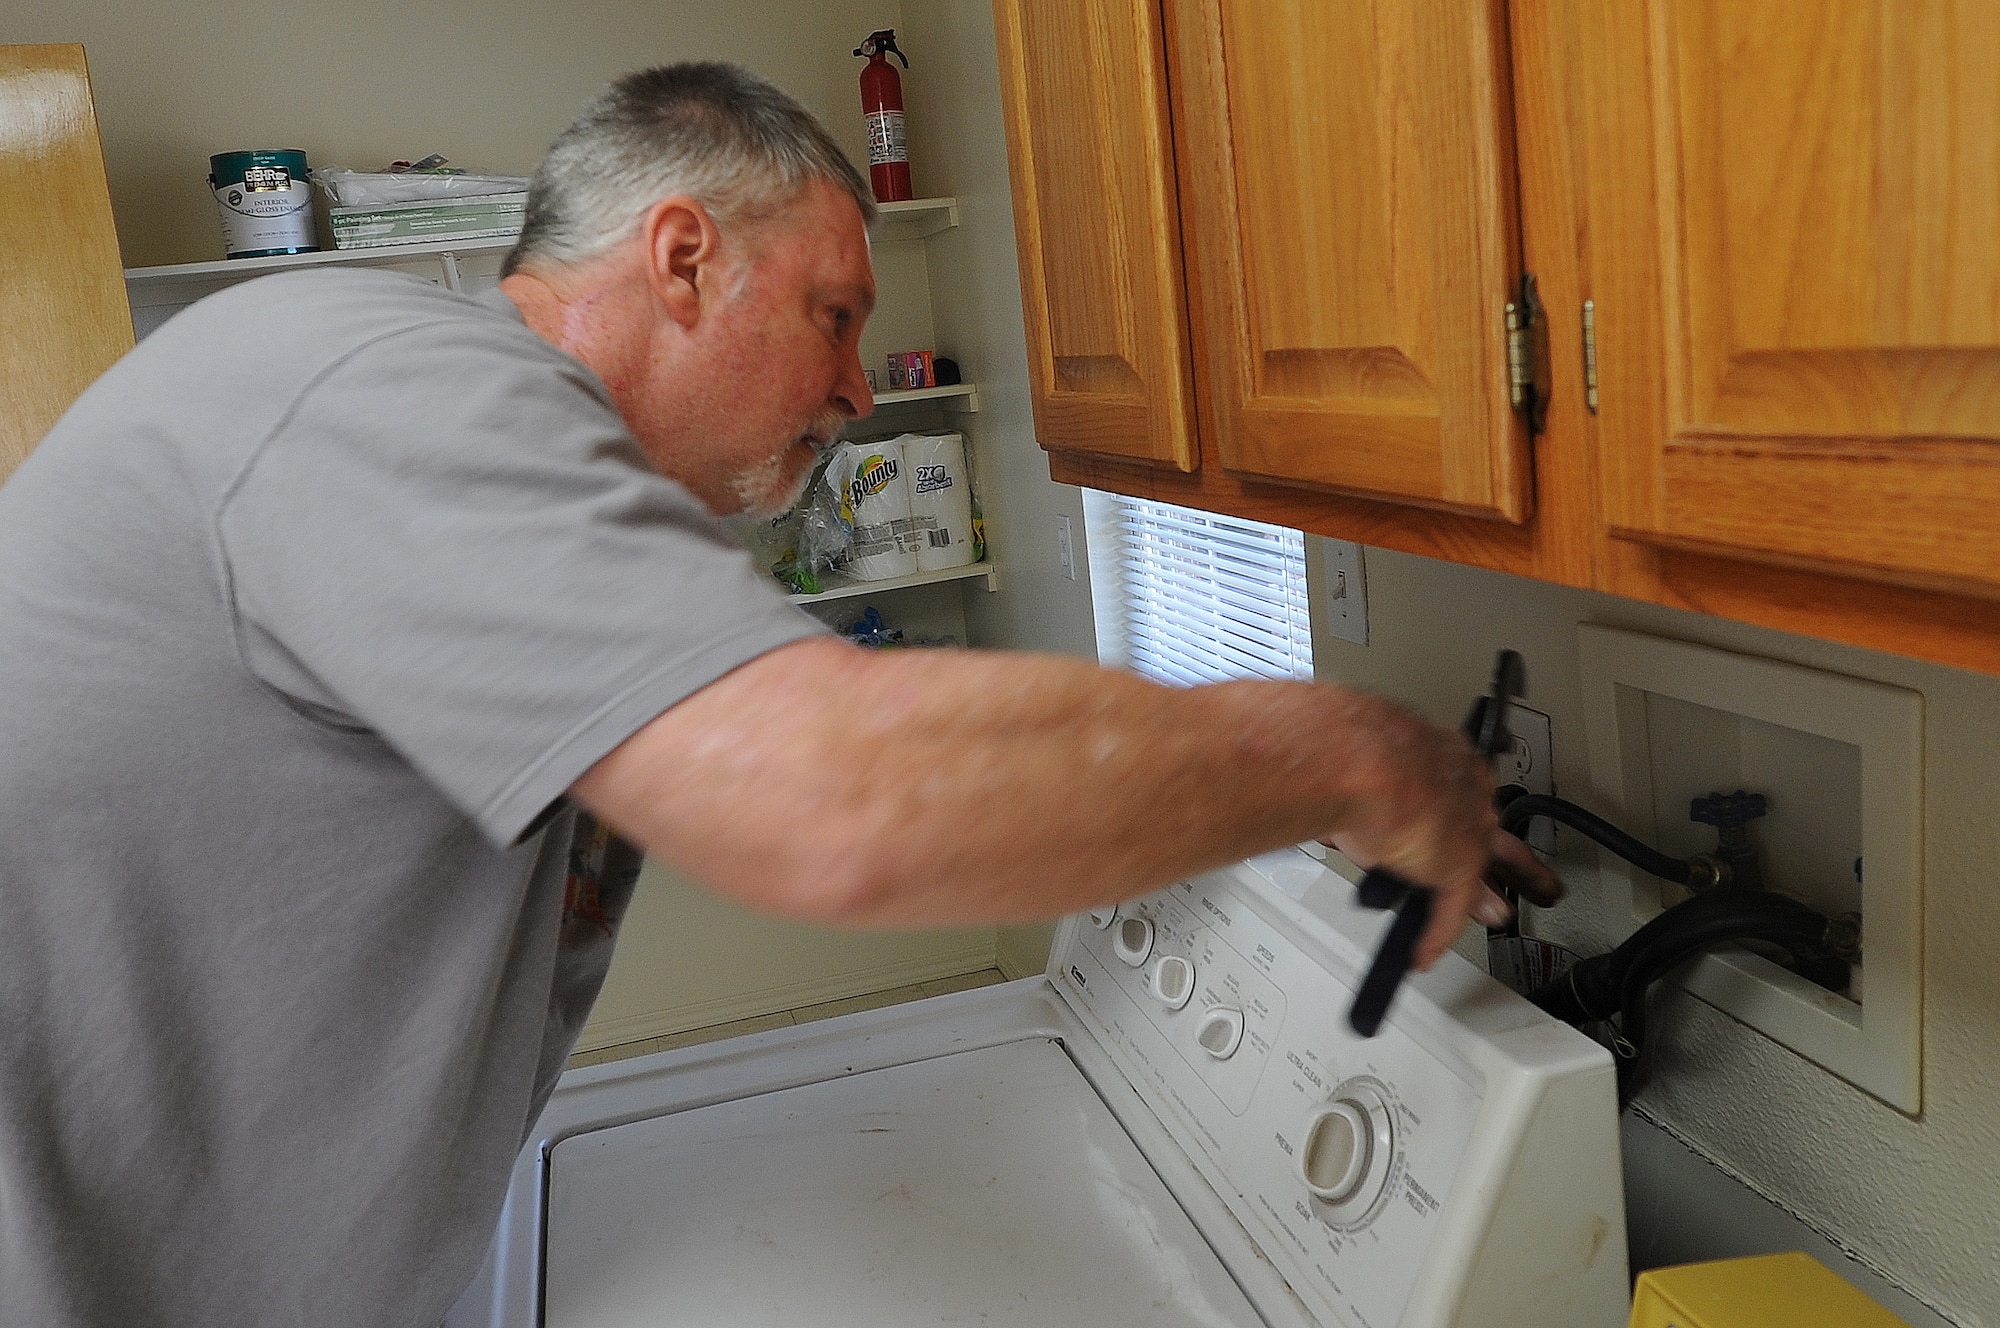 ALTUS AIR FORCE BASE, Okla. – Retired U.S. Air Force Tech. Sgt. Marshall Hermer, 97th Maintenance Directorate jet engine mechanic, installs a washer in an Airman’s house May 9, 2014. Hermer has restored, delivered and maintained more than 75 sets of washers and dryers in the past two years as part of the Altus Armed Services YMCA Washer and Dryer Program that gives junior enlisted Airmen restored laundry appliances for free. (U.S. Air Force photo by Senior Airman Levin Boland/Released)